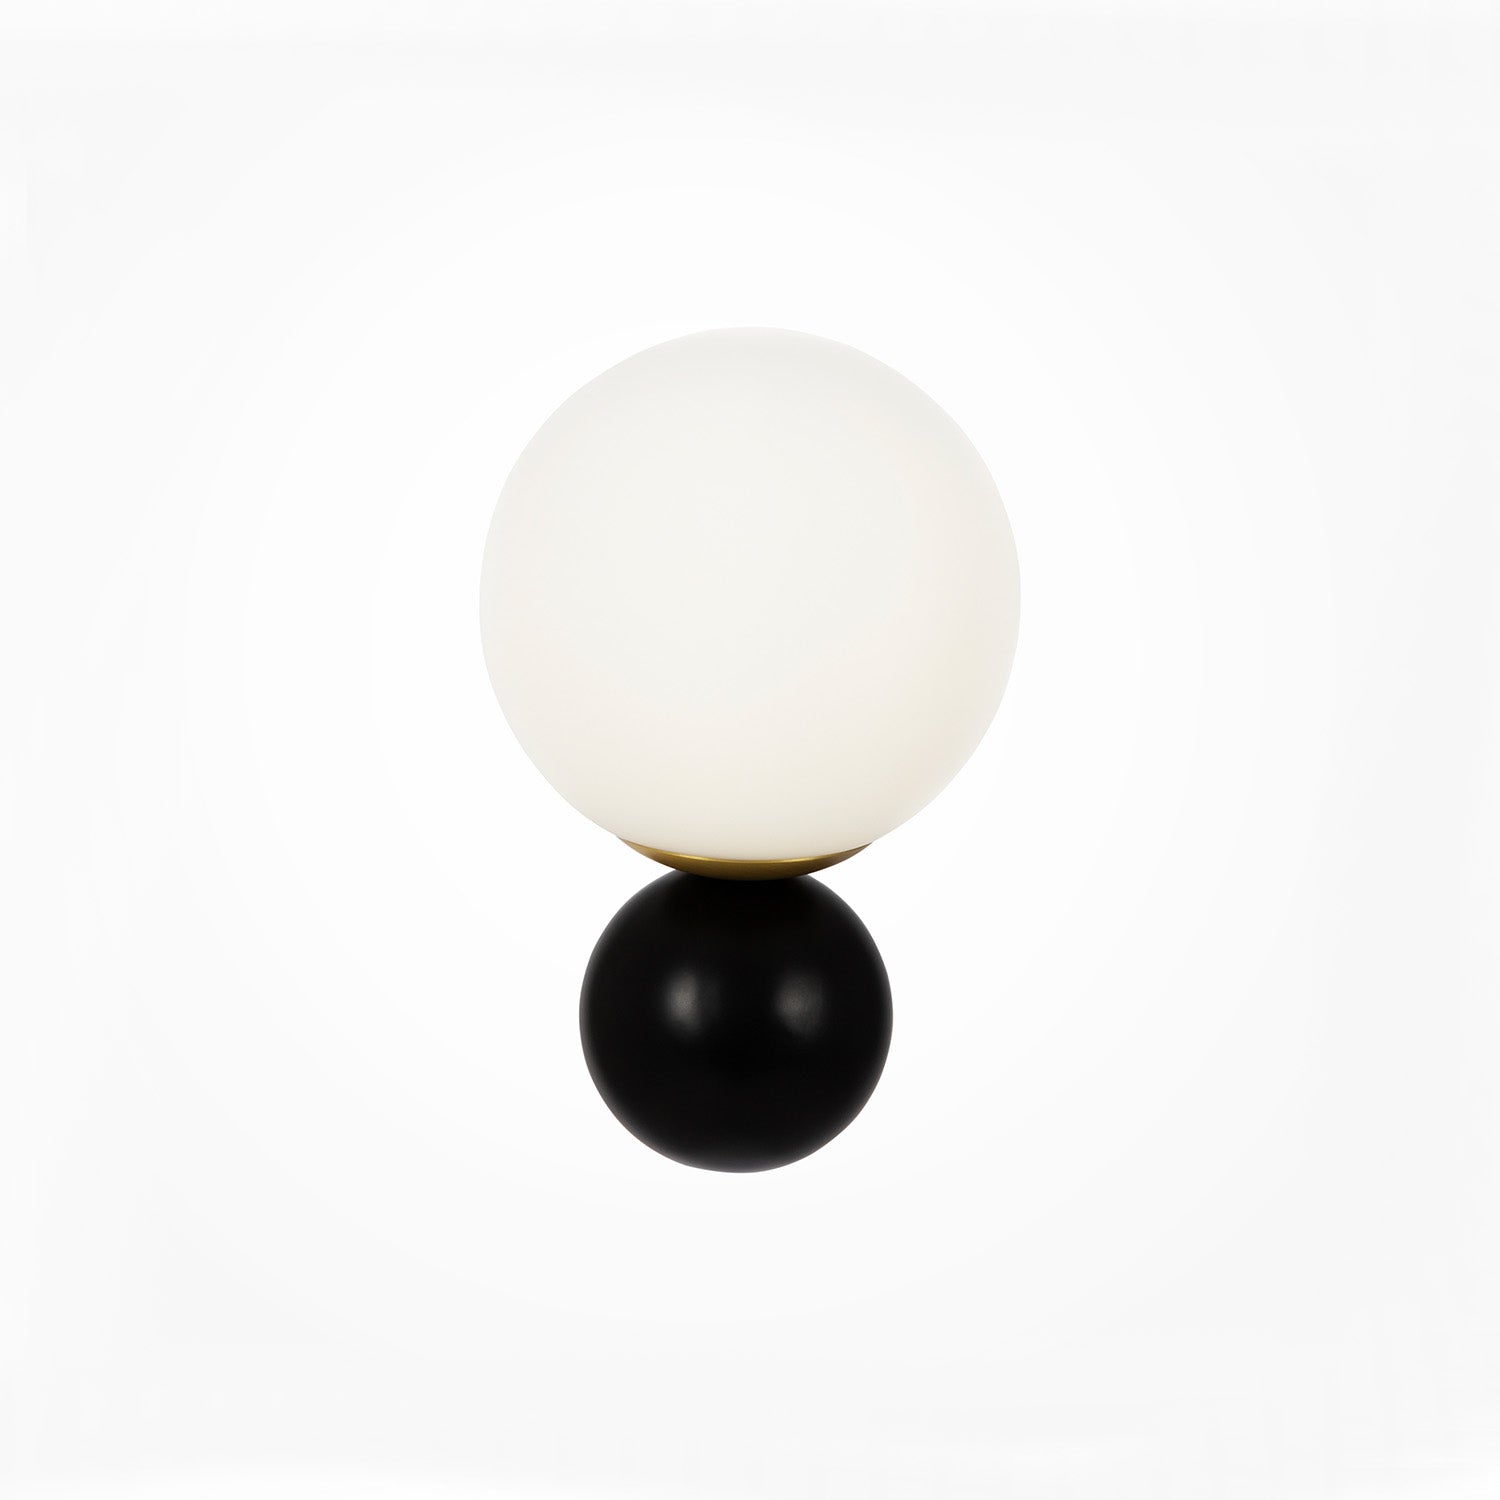 NOSTALGIA A - Art deco wall light with glass balls, gold and black